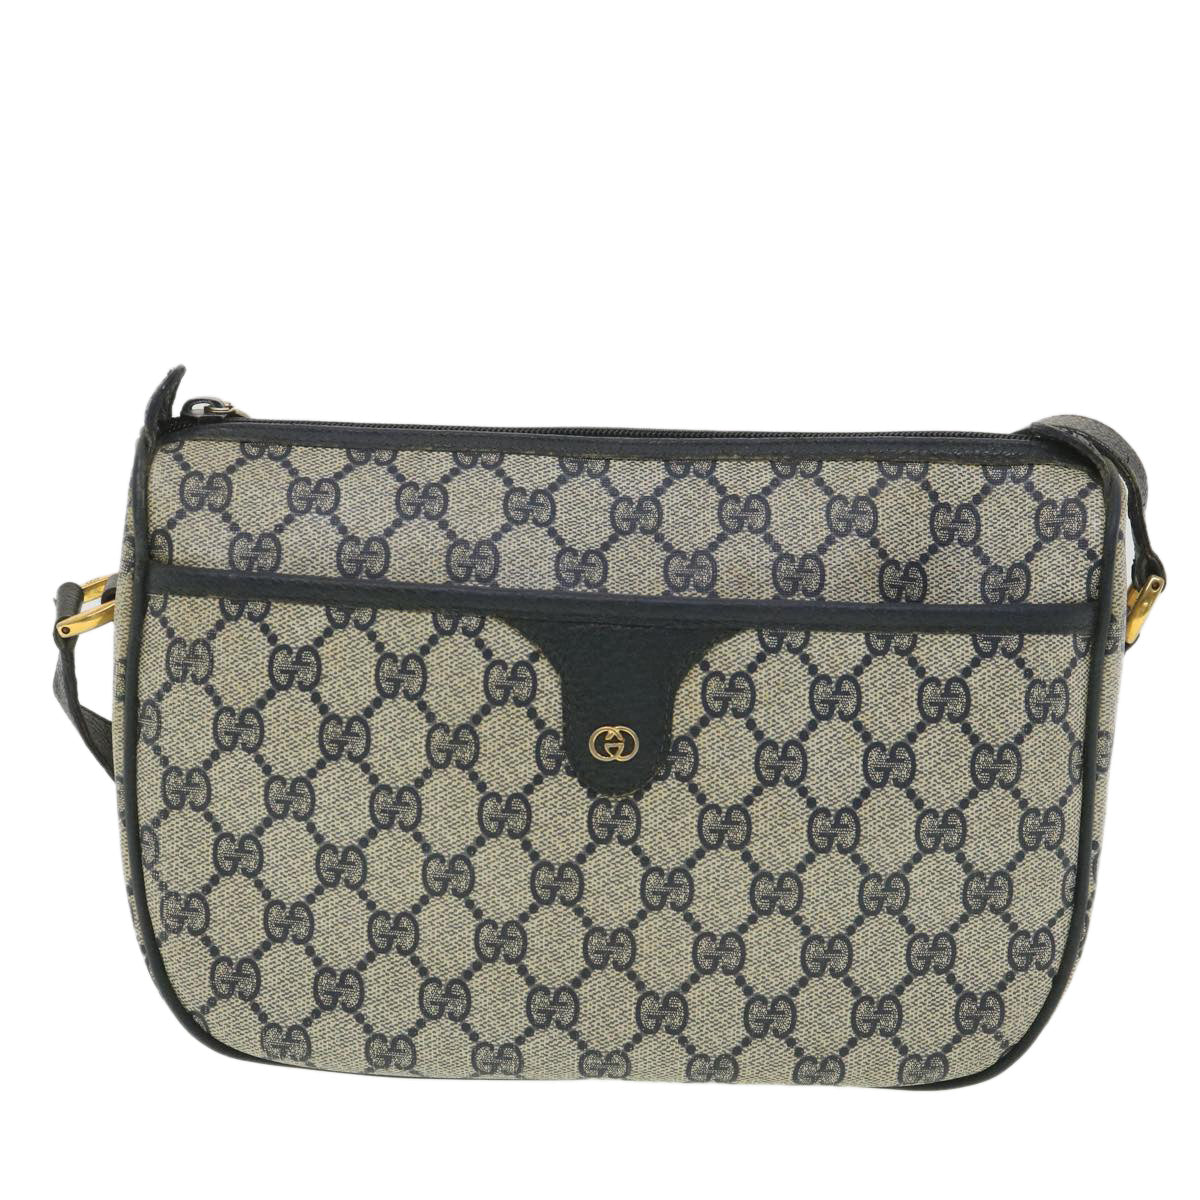 GUCCI GG Canvas Shoulder Bag PVC Leather Gray Navy 001 115 6106 Auth 38113